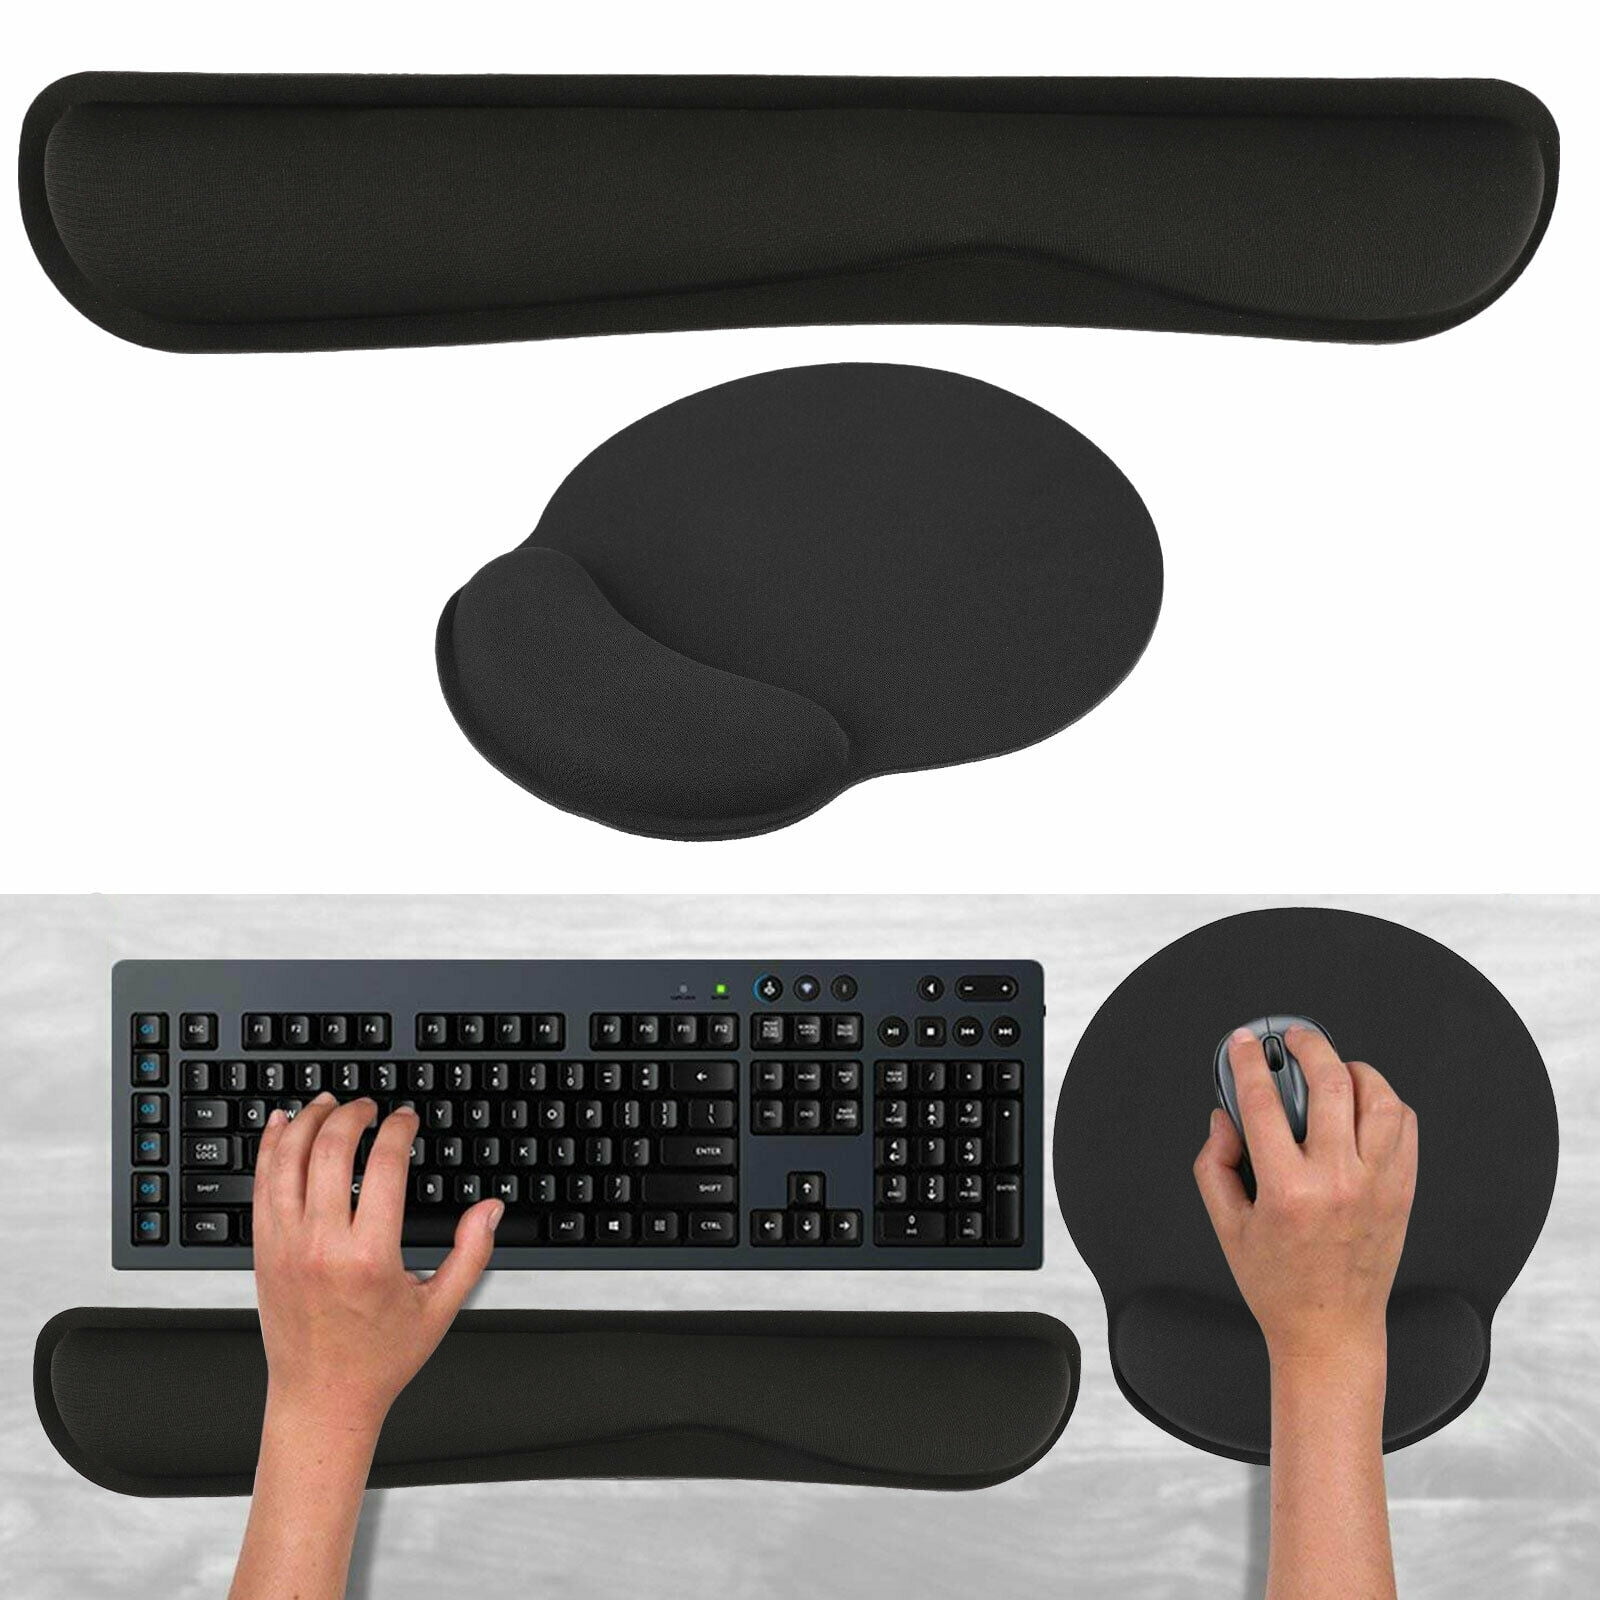 Memory Foam Keyboard Wrist Rest Pad and Silica Gel Mouse Pad Wrist Support L 